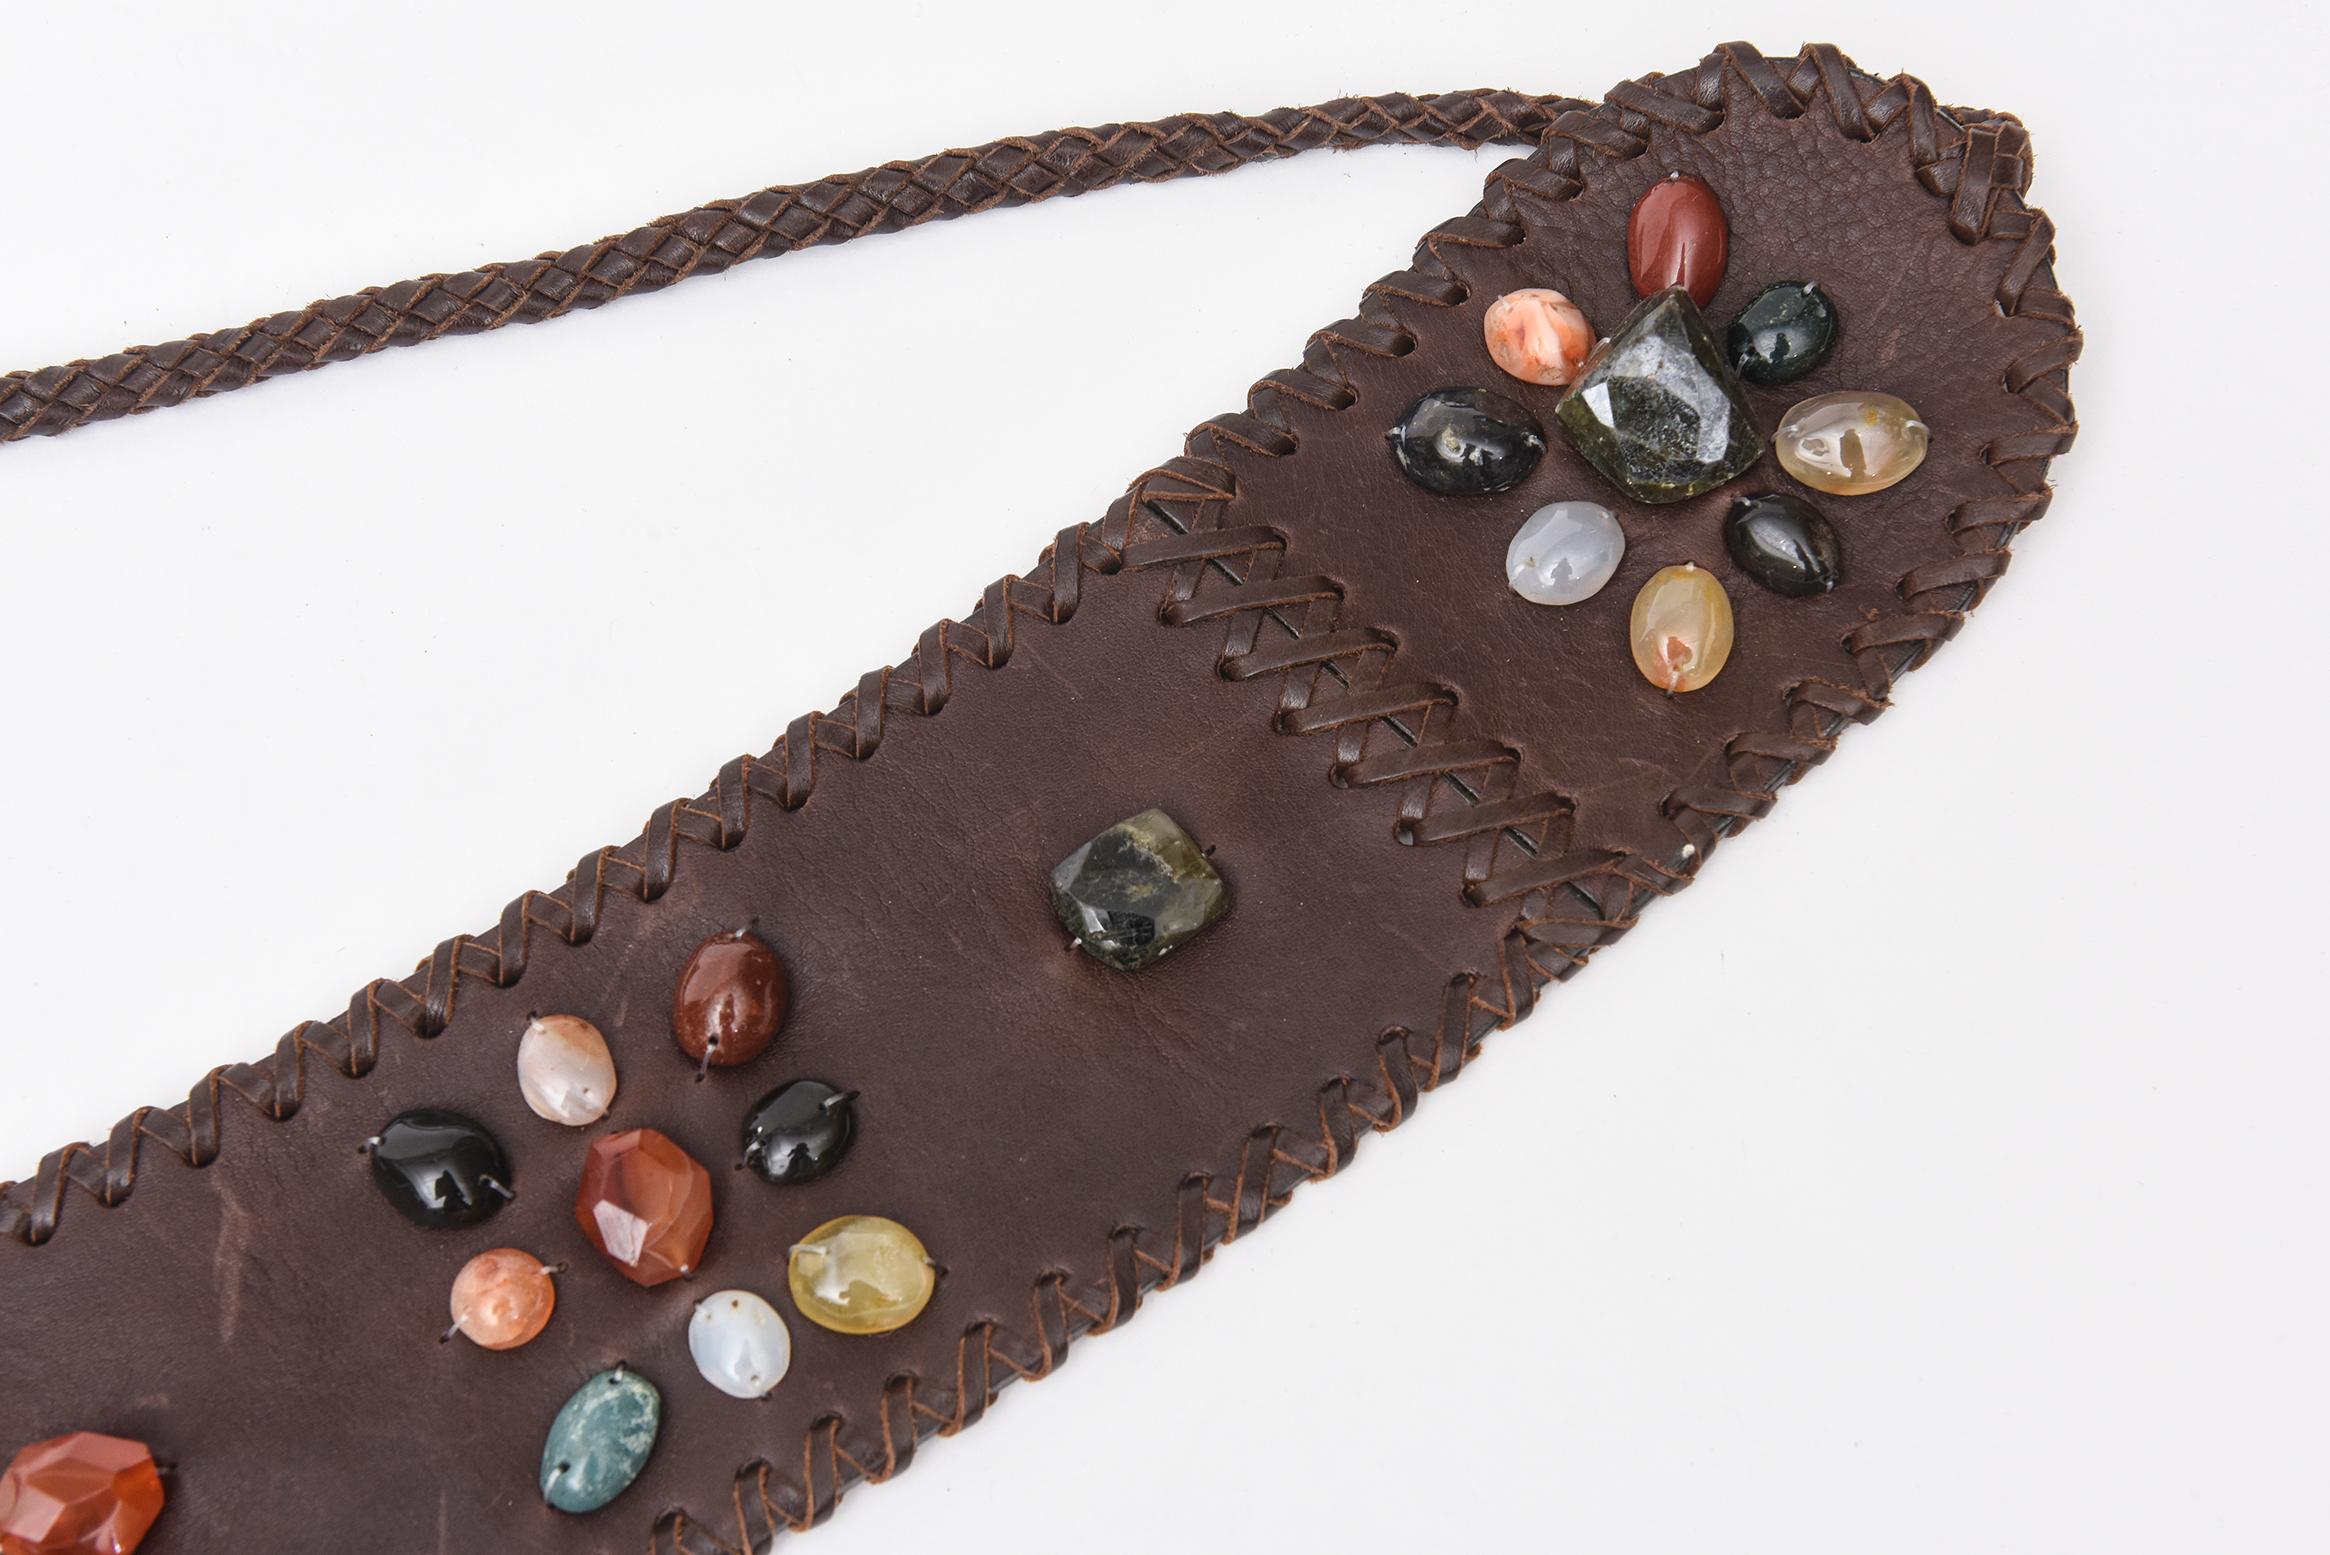 This gorgeous never used brown stitched leather tie belt has assorted cluster of beautiful agate stones in different colors. There are dimensional and raised.  The colors are varied and are in hues of orange, light yellow, shades of green, black,